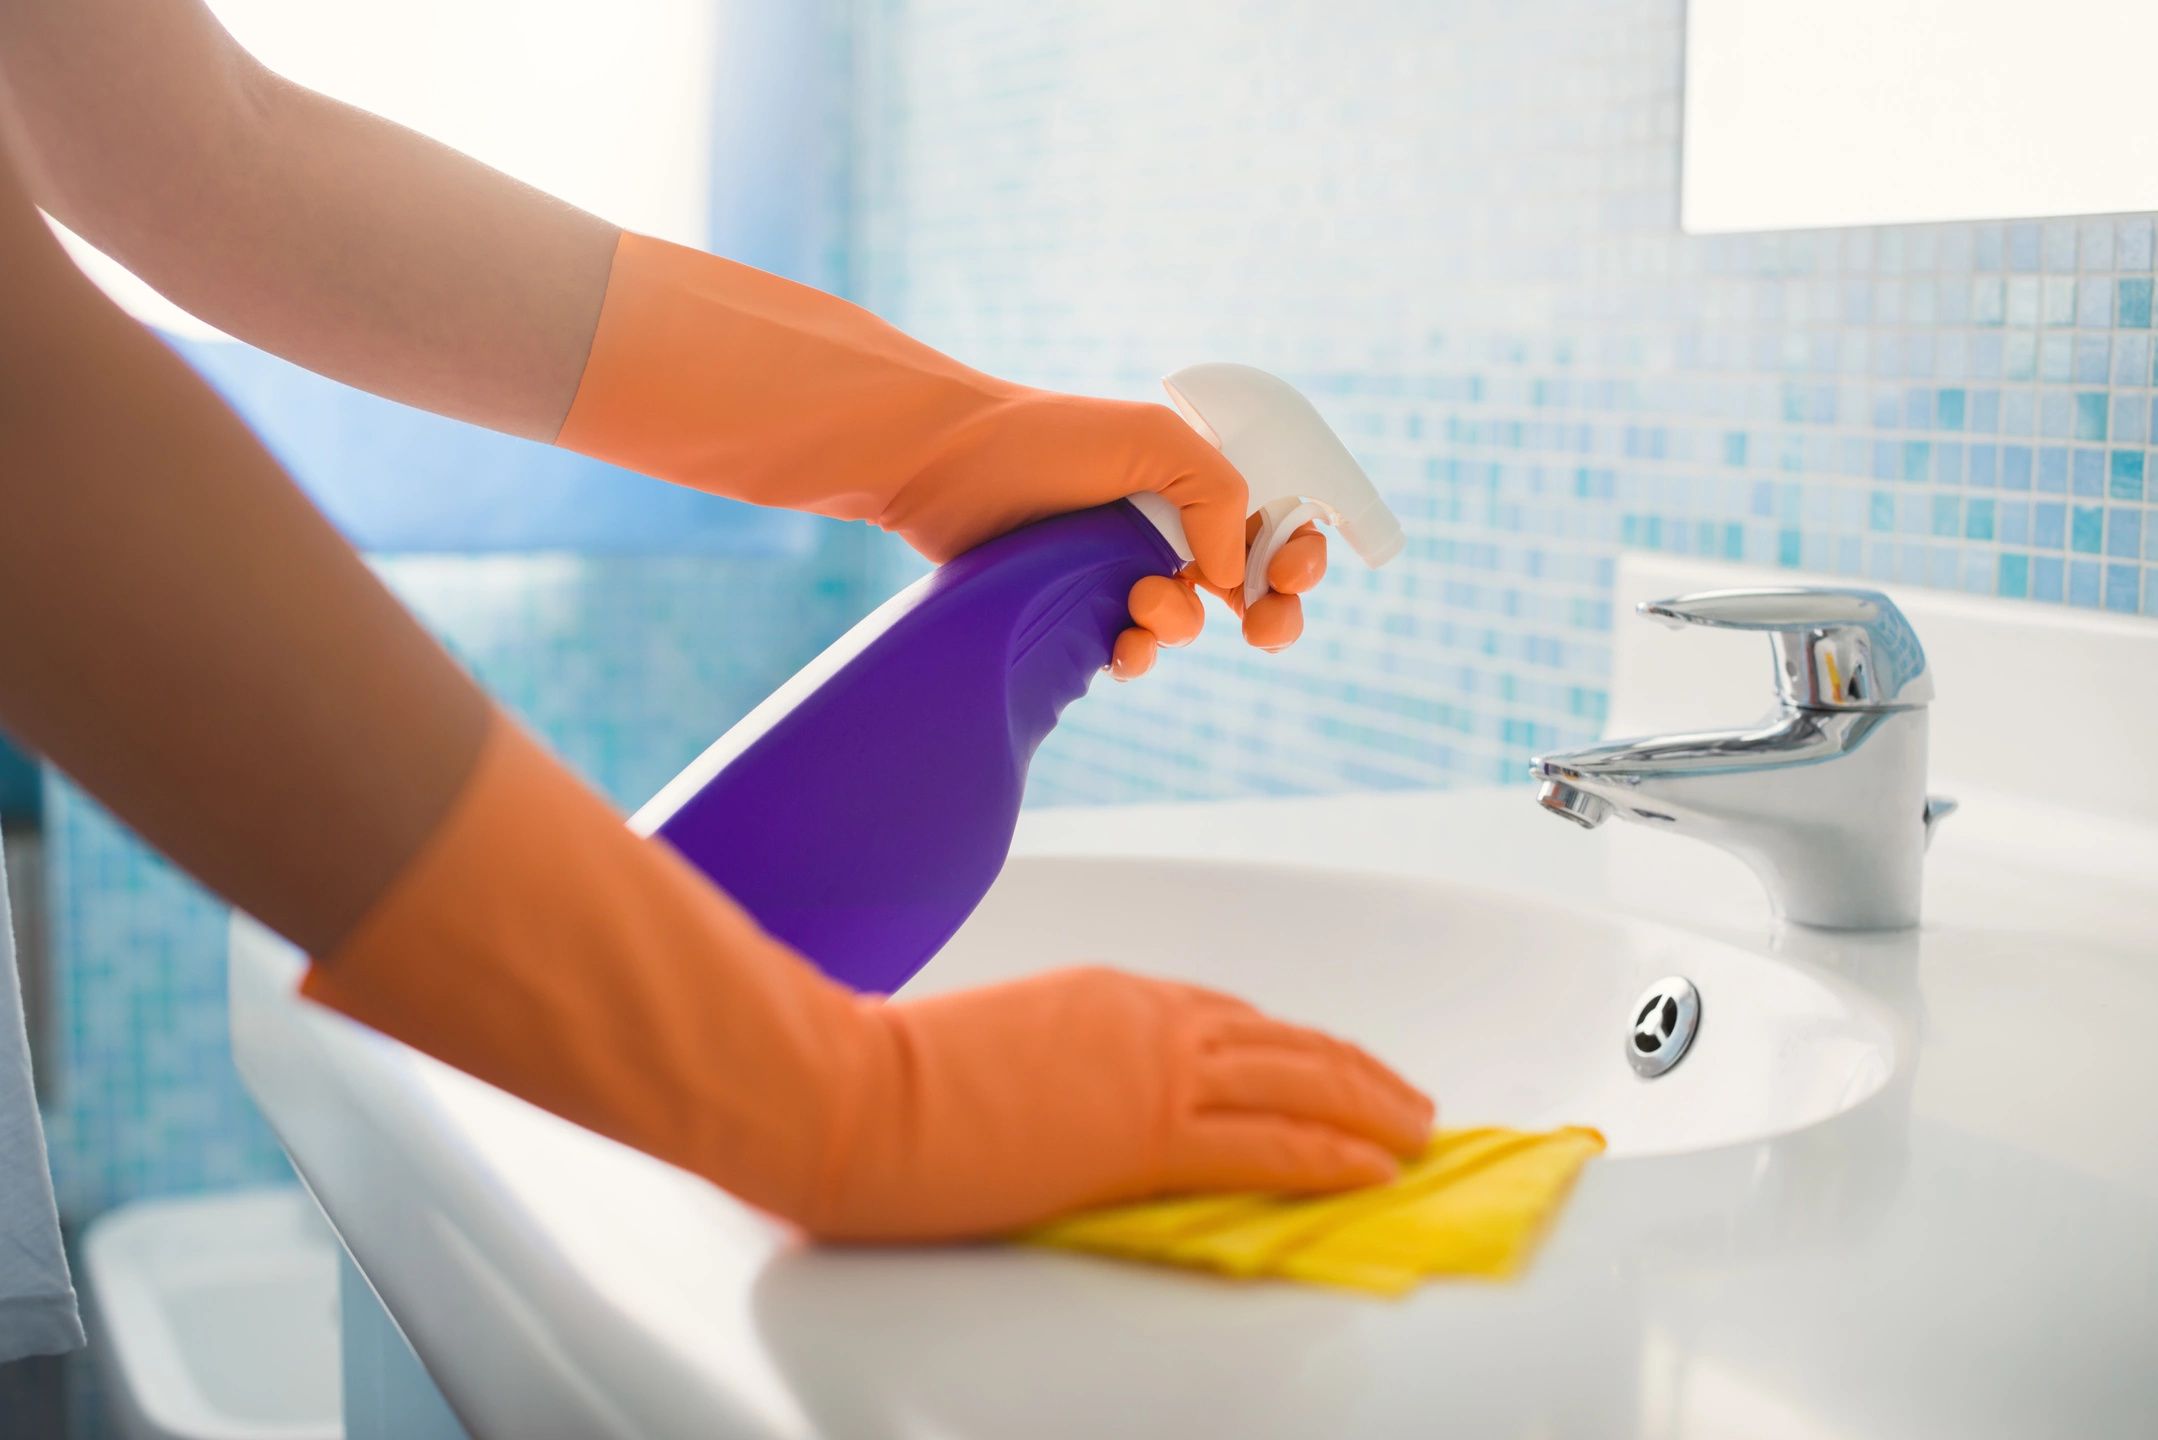 Person wearing rubber gloves cleans a sink with a spray bottle and a cloth